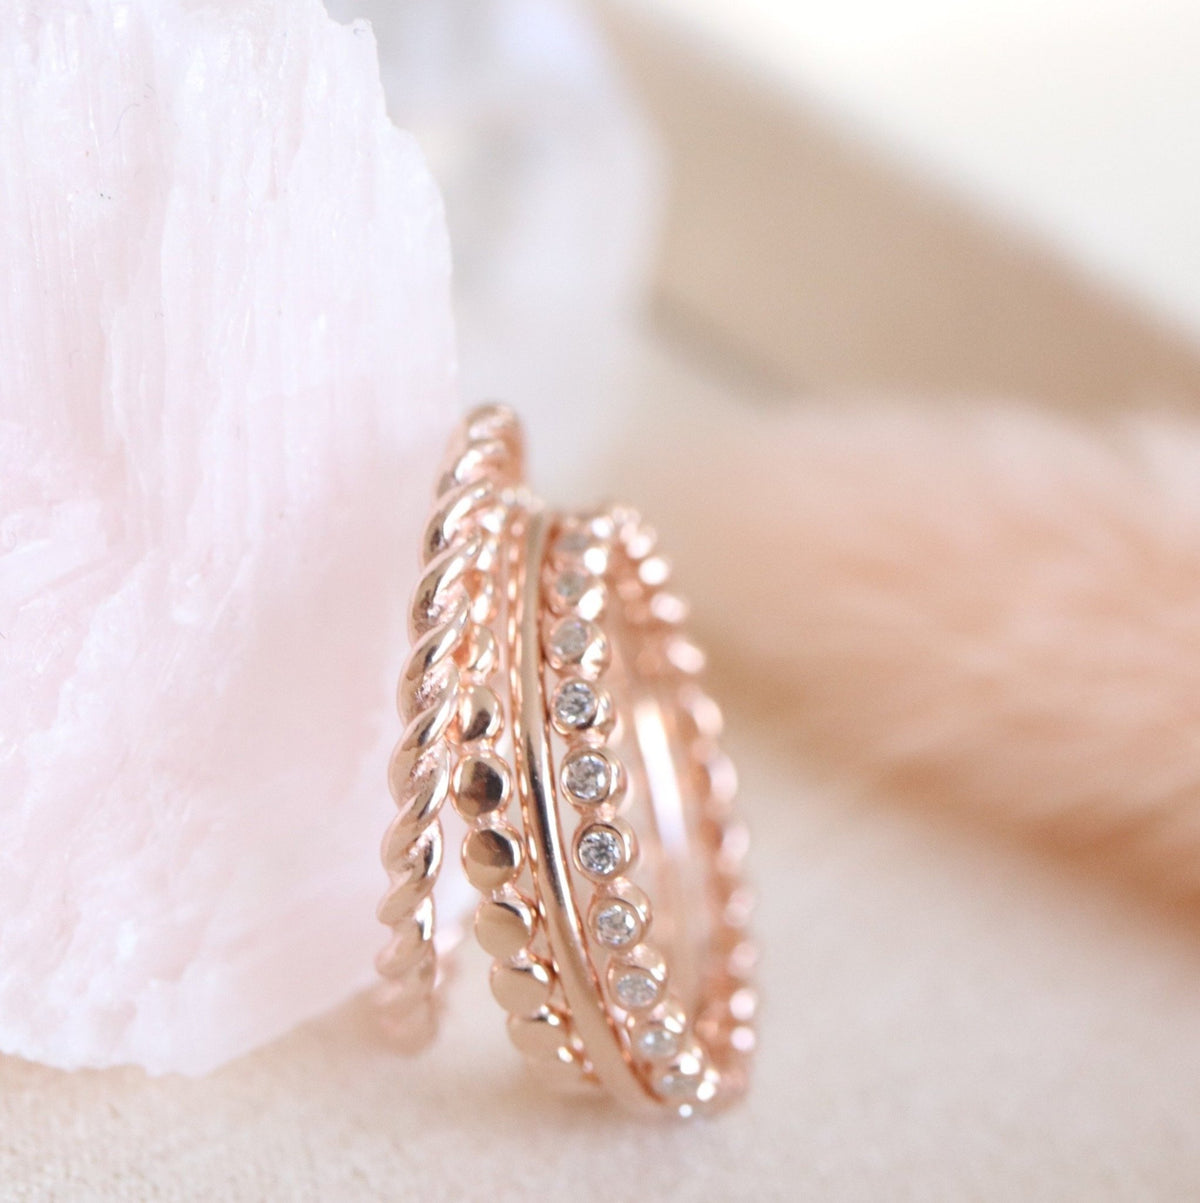 POISE THIN BAND RING - ROSE GOLD - SO PRETTY CARA COTTER